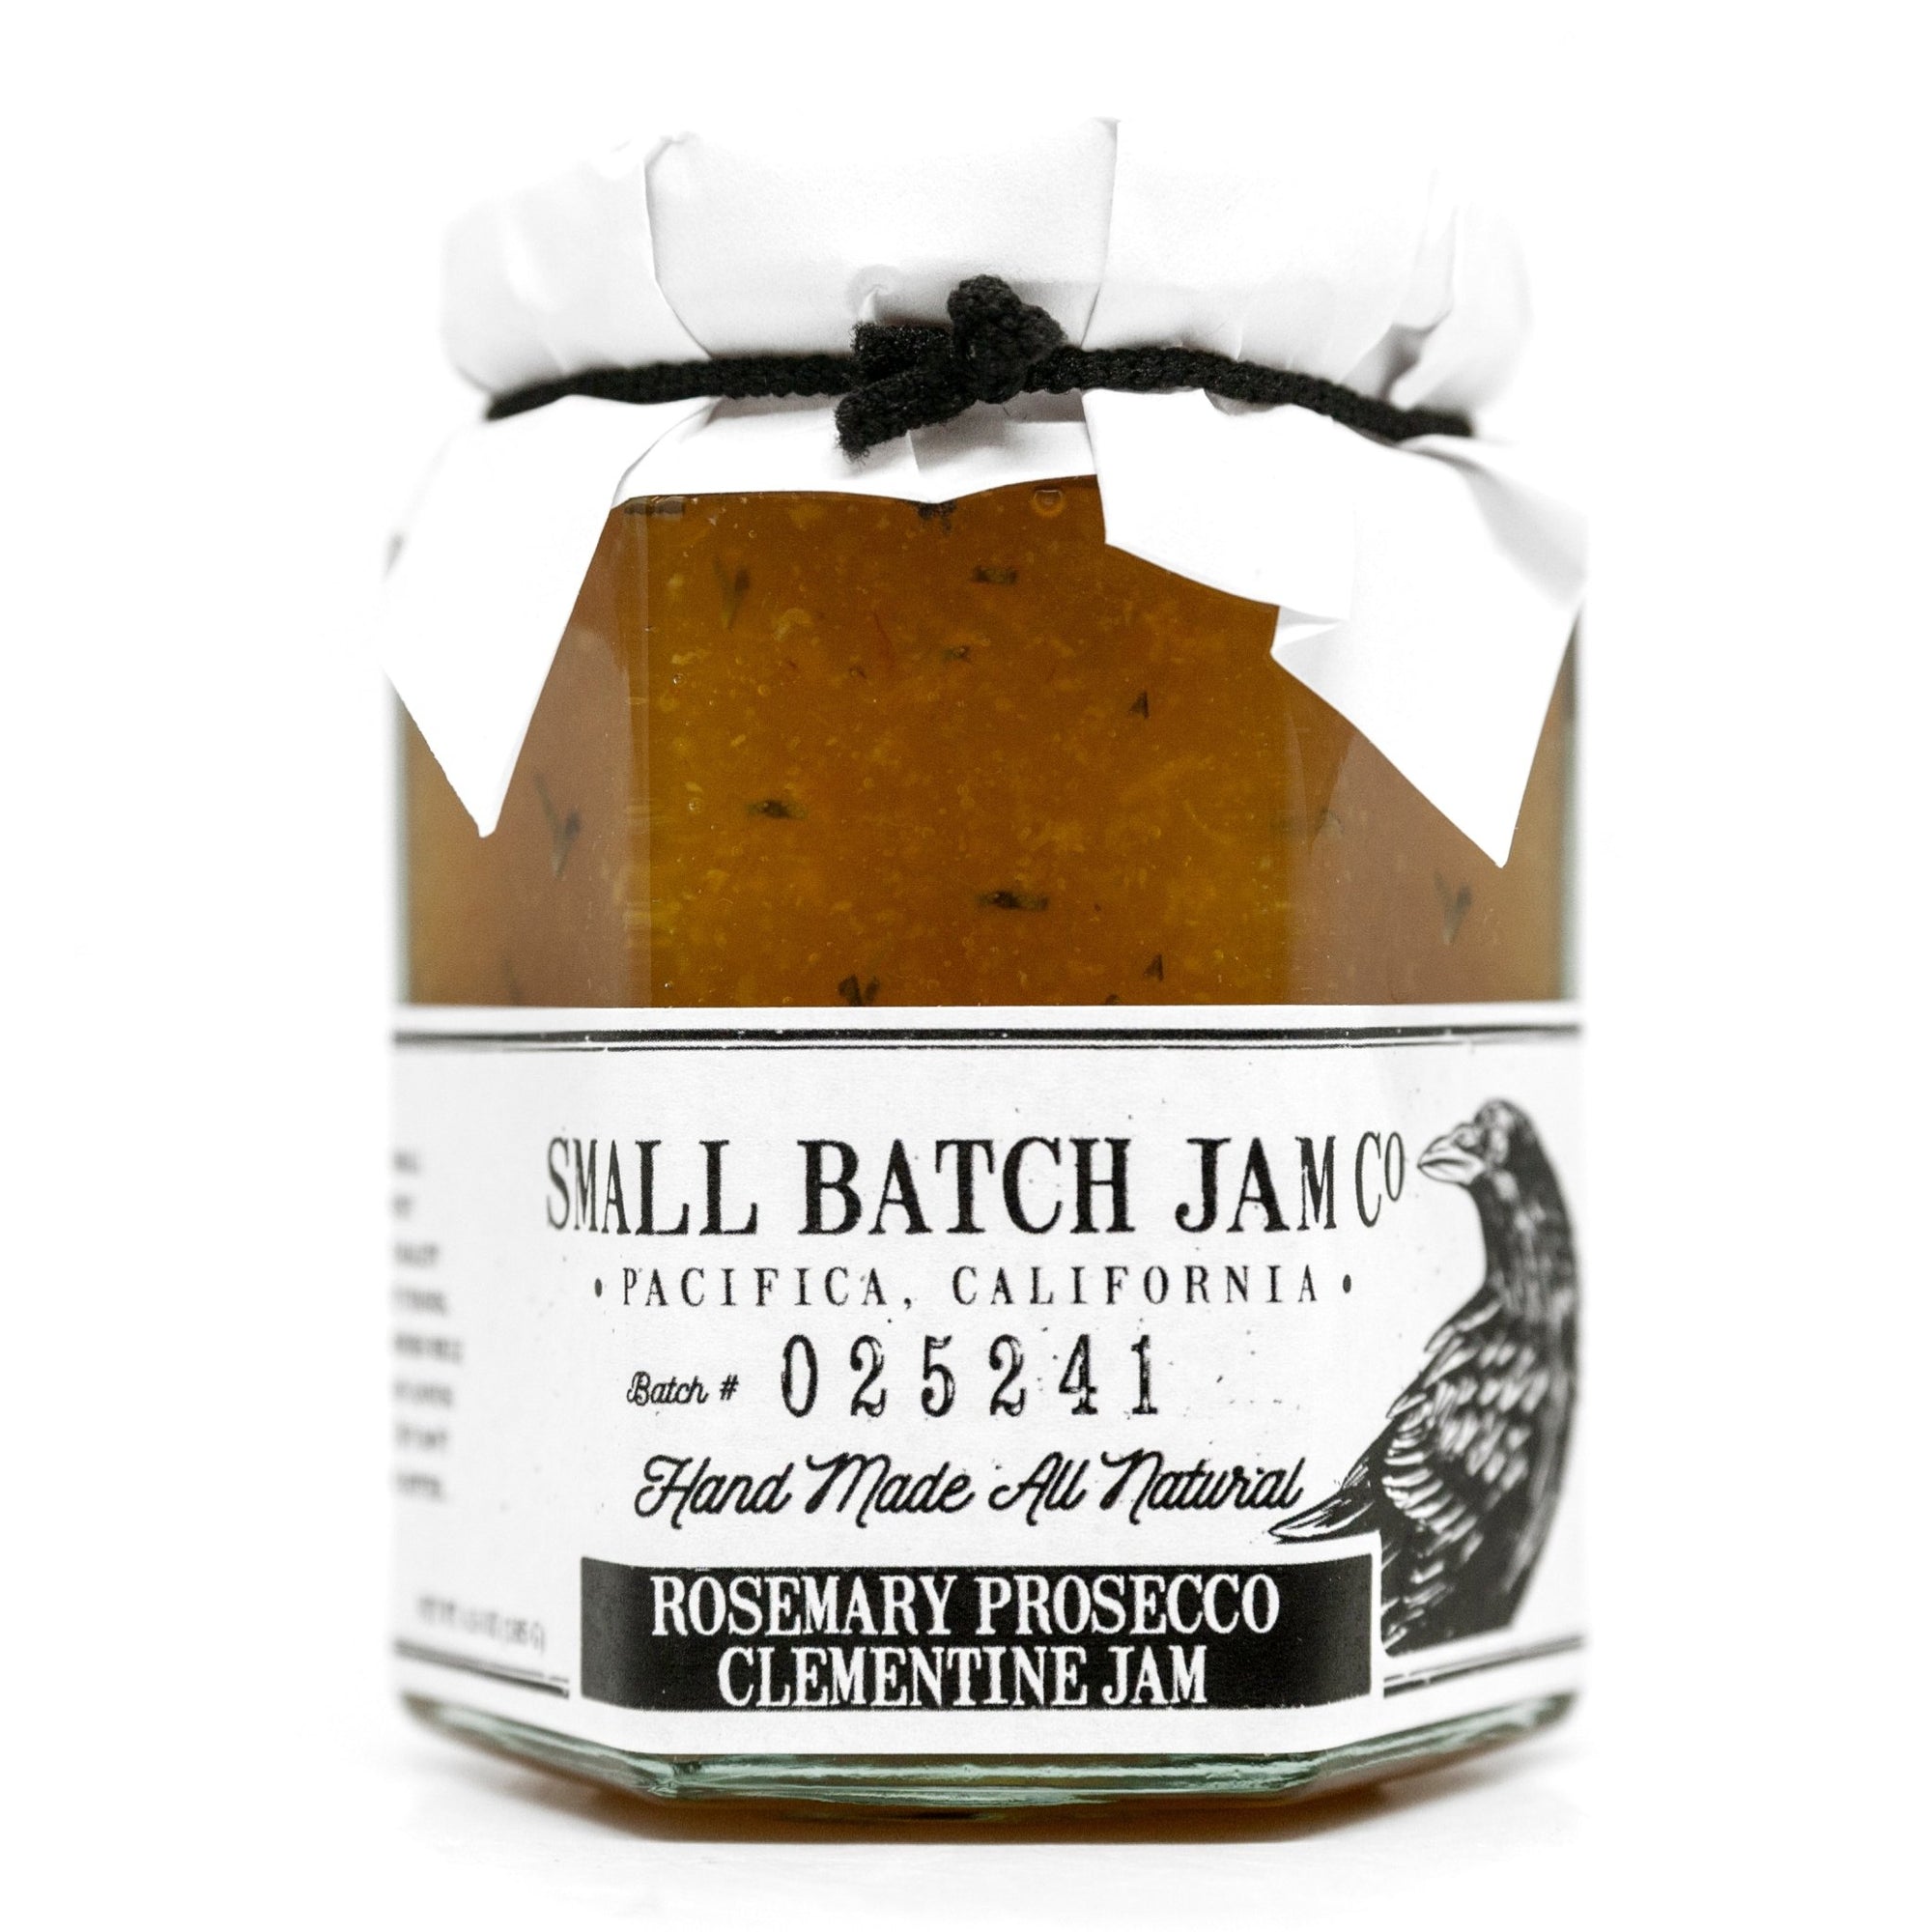 Rosemary Prosecco Clementine Jam - Small Batch Jam Co